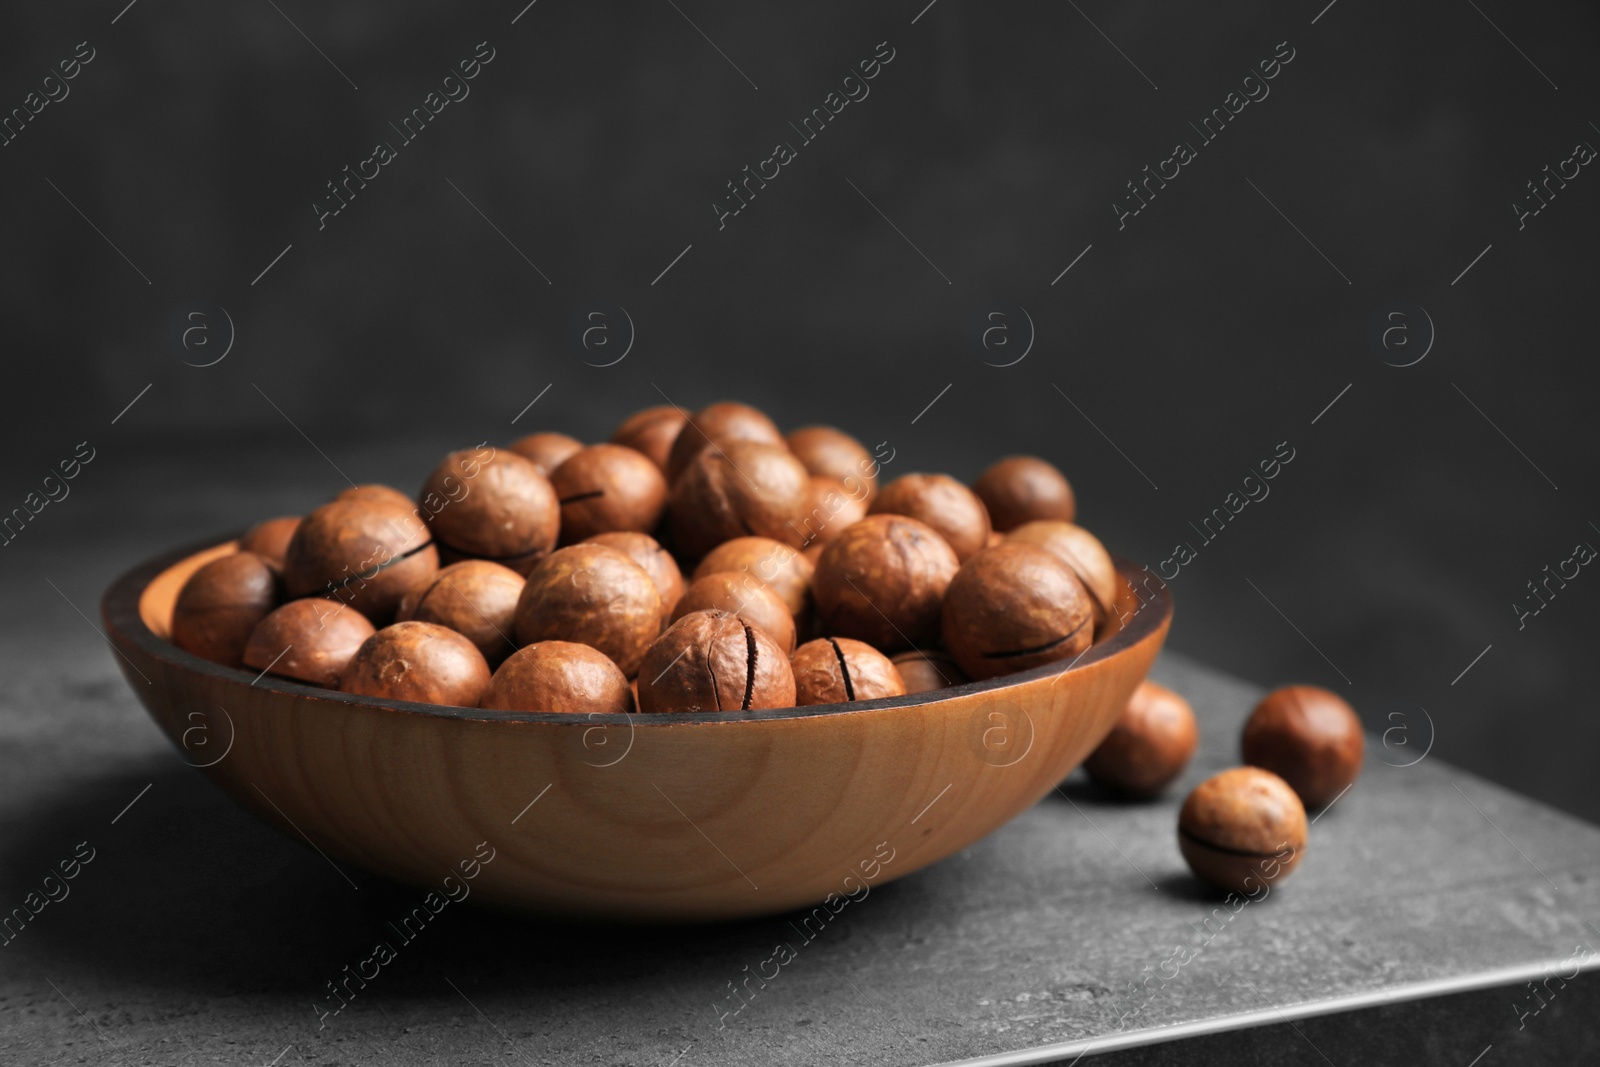 Photo of Plate with organic Macadamia nuts on table against dark background. Space for text